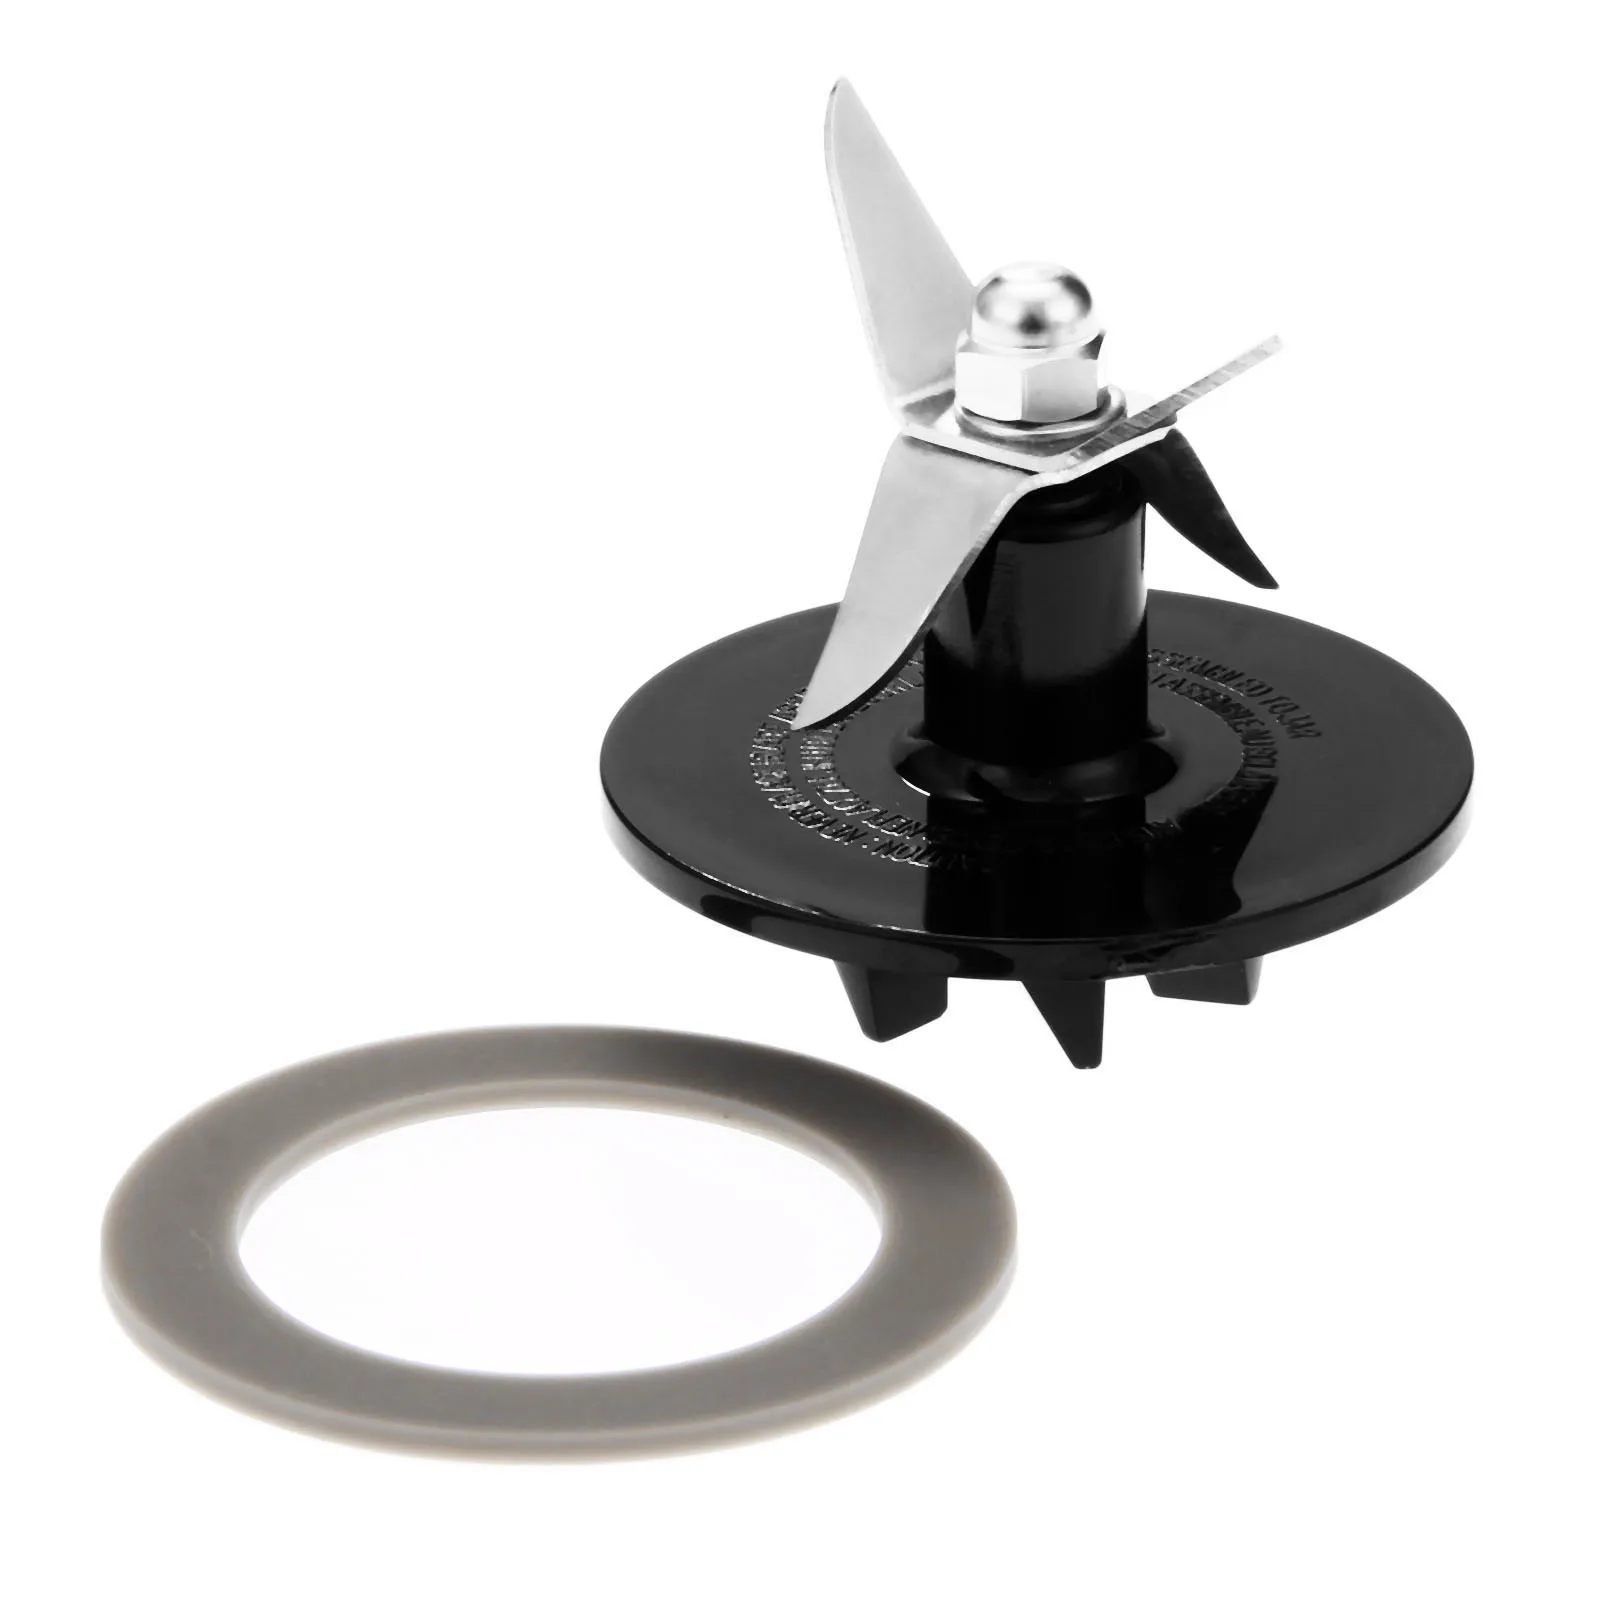 Details about   Blade Cutter with Rubber Gasket Sealing Parts Fit for Cuisinart Blender FPB-5C 